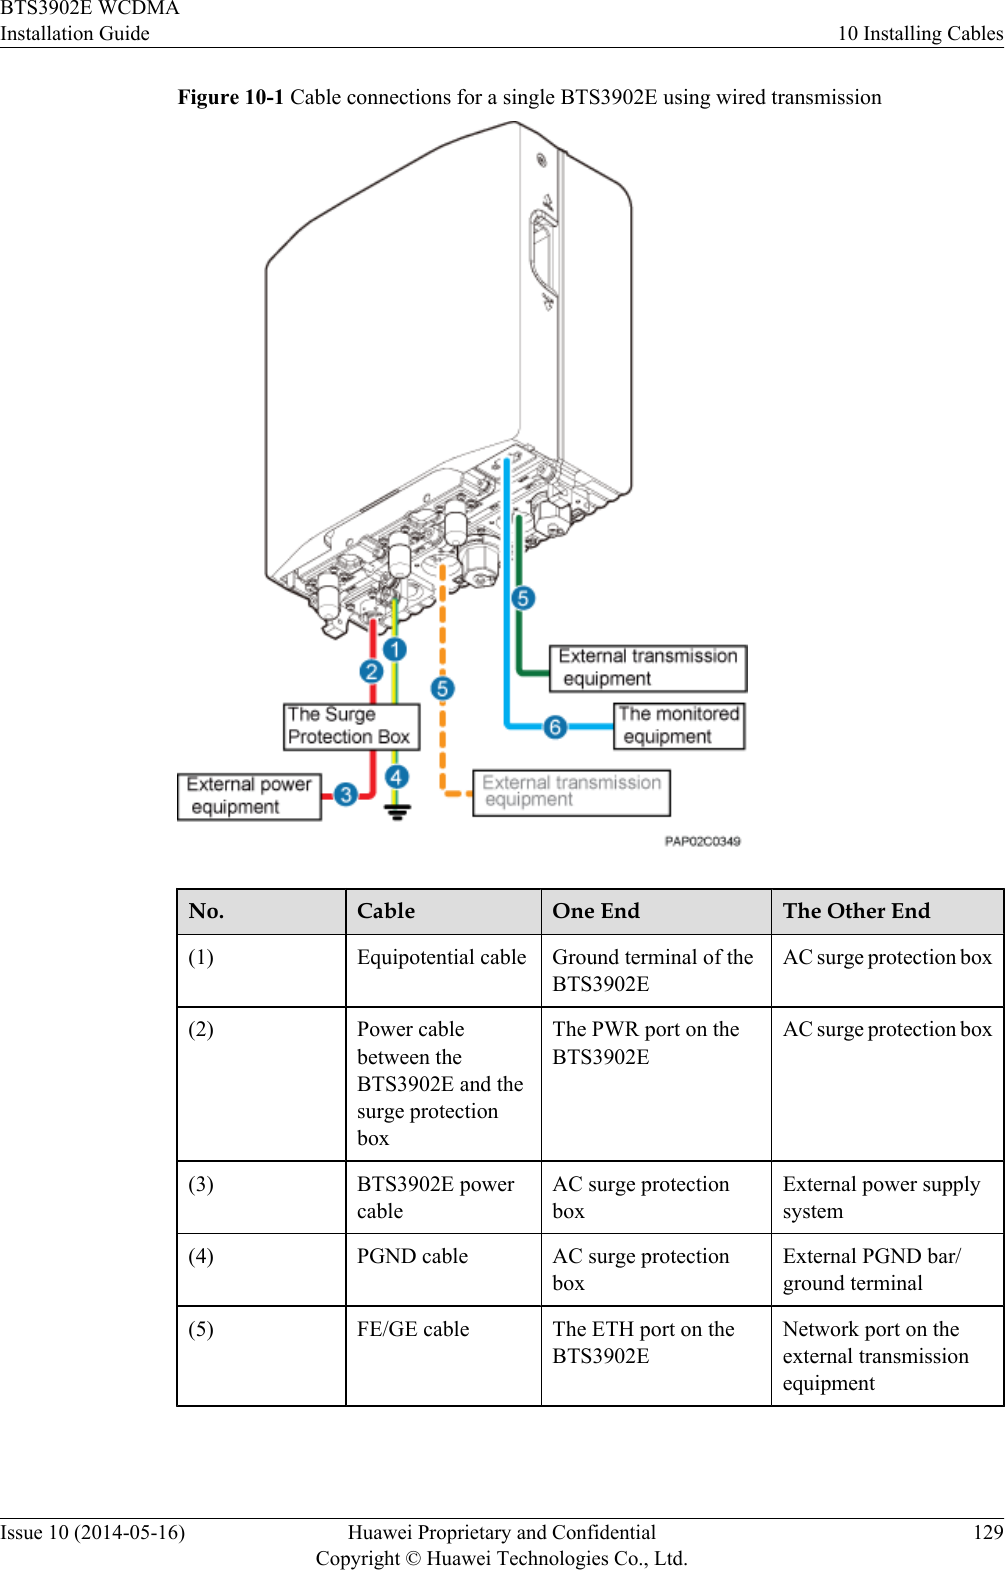 Figure 10-1 Cable connections for a single BTS3902E using wired transmissionNo. Cable One End The Other End(1) Equipotential cable Ground terminal of theBTS3902EAC surge protection box(2) Power cablebetween theBTS3902E and thesurge protectionboxThe PWR port on theBTS3902EAC surge protection box(3) BTS3902E powercableAC surge protectionboxExternal power supplysystem(4) PGND cable AC surge protectionboxExternal PGND bar/ground terminal(5) FE/GE cable The ETH port on theBTS3902ENetwork port on theexternal transmissionequipmentBTS3902E WCDMAInstallation Guide 10 Installing CablesIssue 10 (2014-05-16) Huawei Proprietary and ConfidentialCopyright © Huawei Technologies Co., Ltd.129